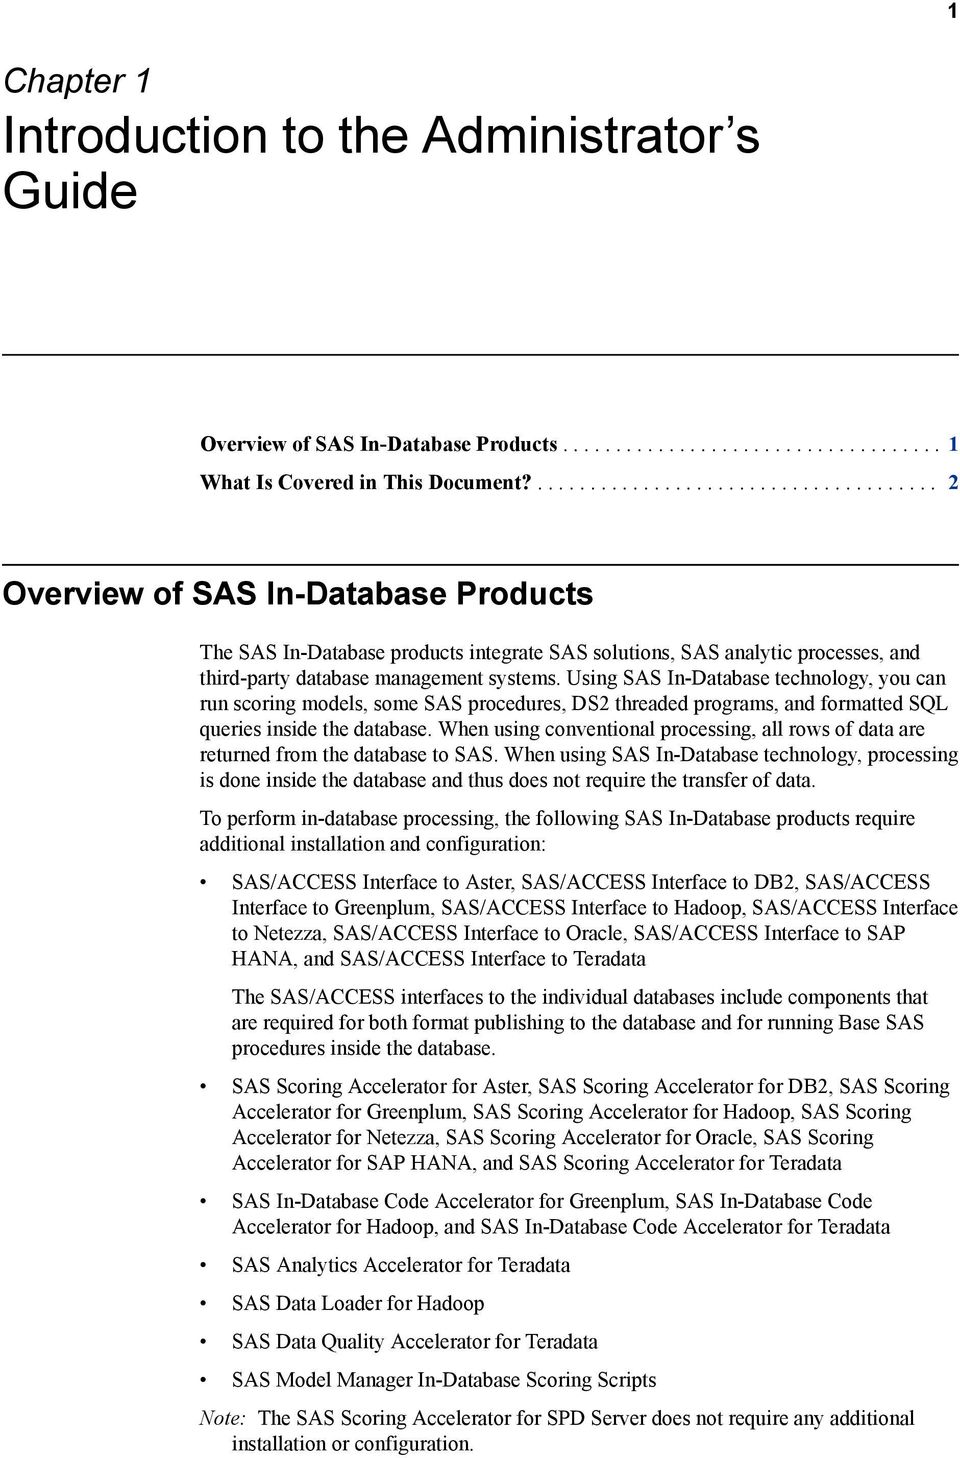 Using SAS In-Database technology, you can run scoring models, some SAS procedures, DS2 threaded programs, and formatted SQL queries inside the database.